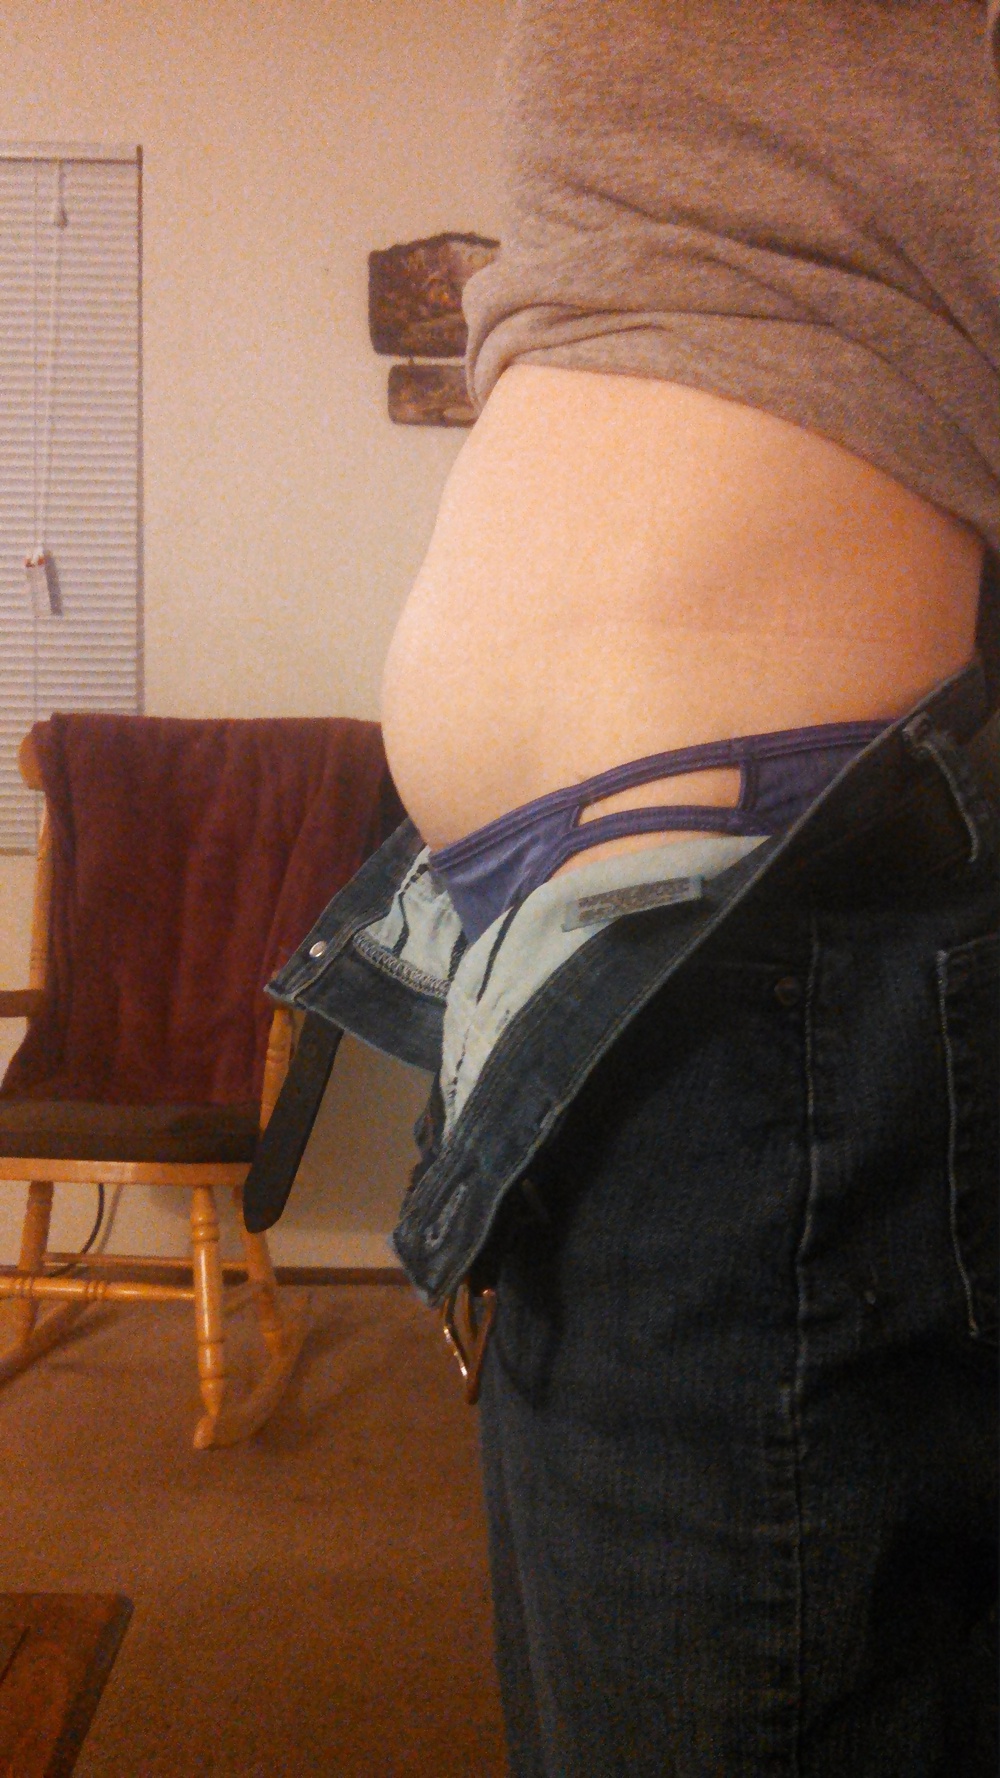 My hot wife's pregnant belly. #25717360